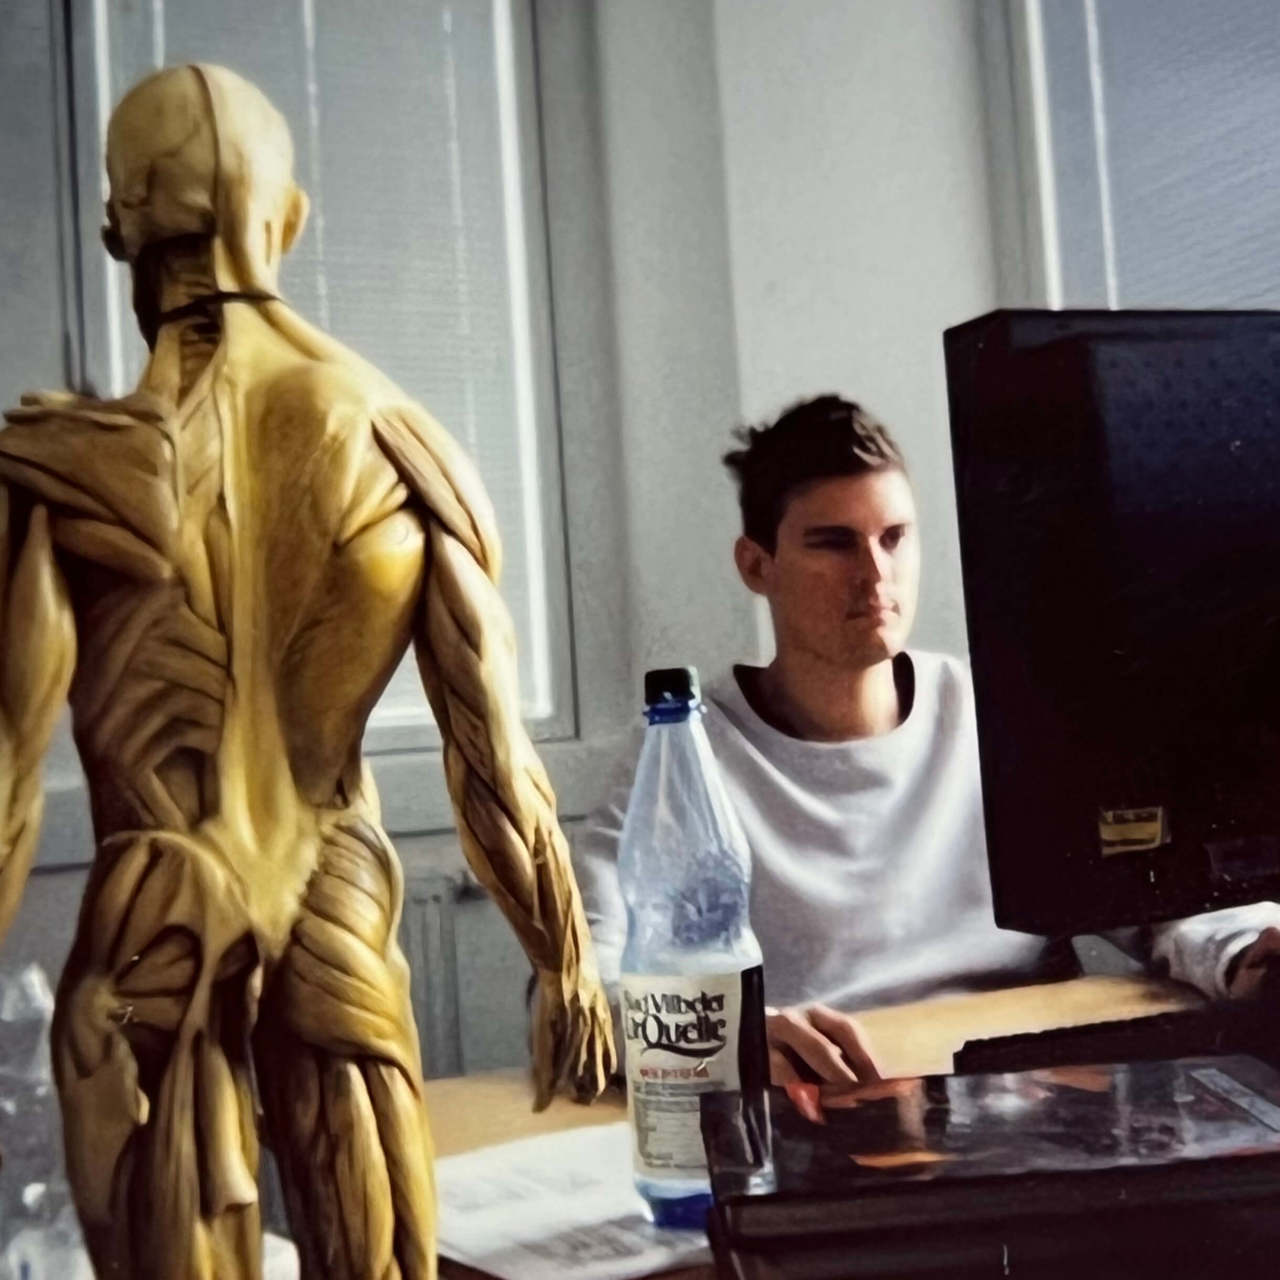 A Keen employee sat on a computer, with a realistic human model next to them